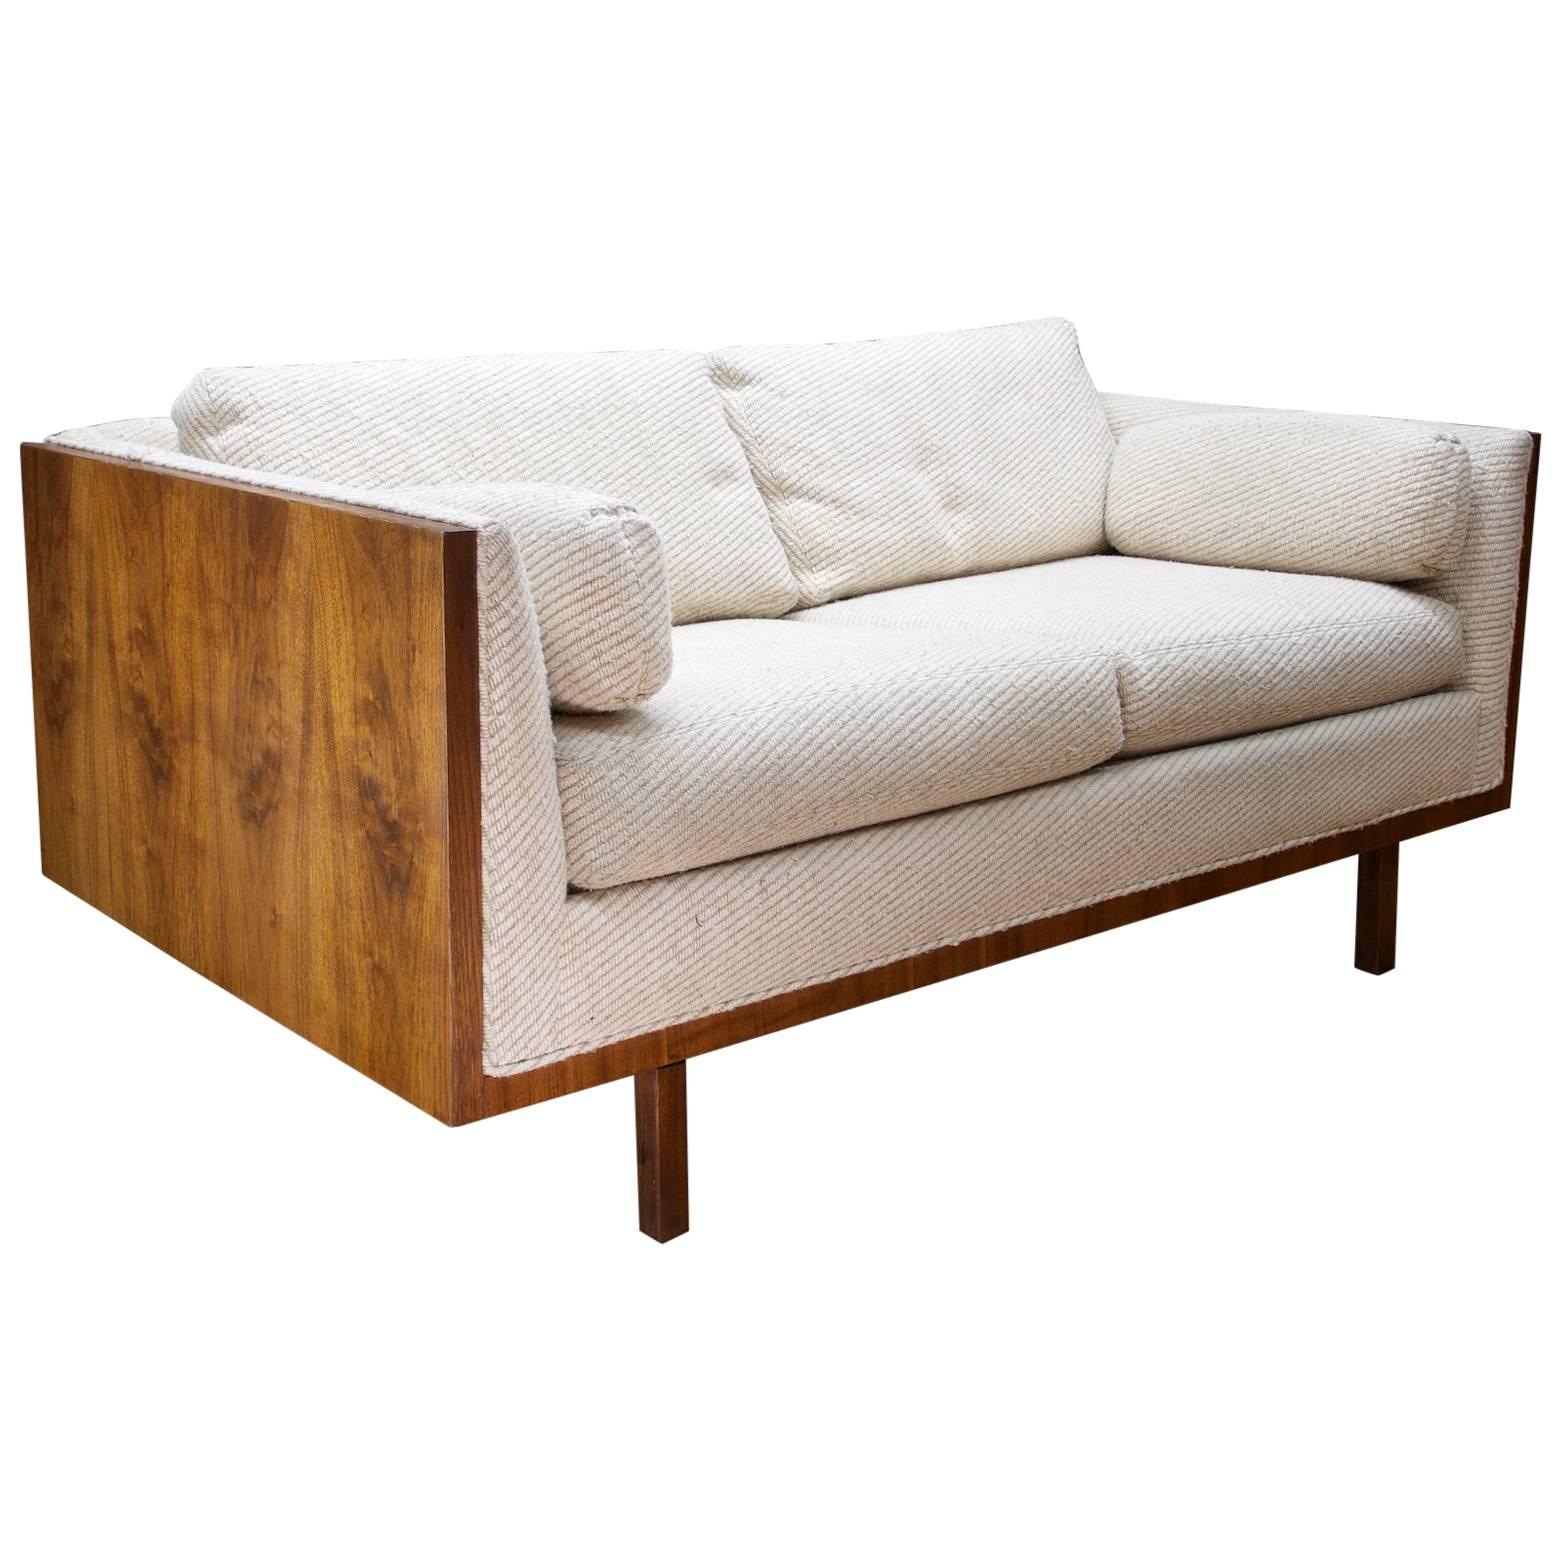 Walnut Loveseat by Forecast Furniture Inc. in Style of Baughman or Risom